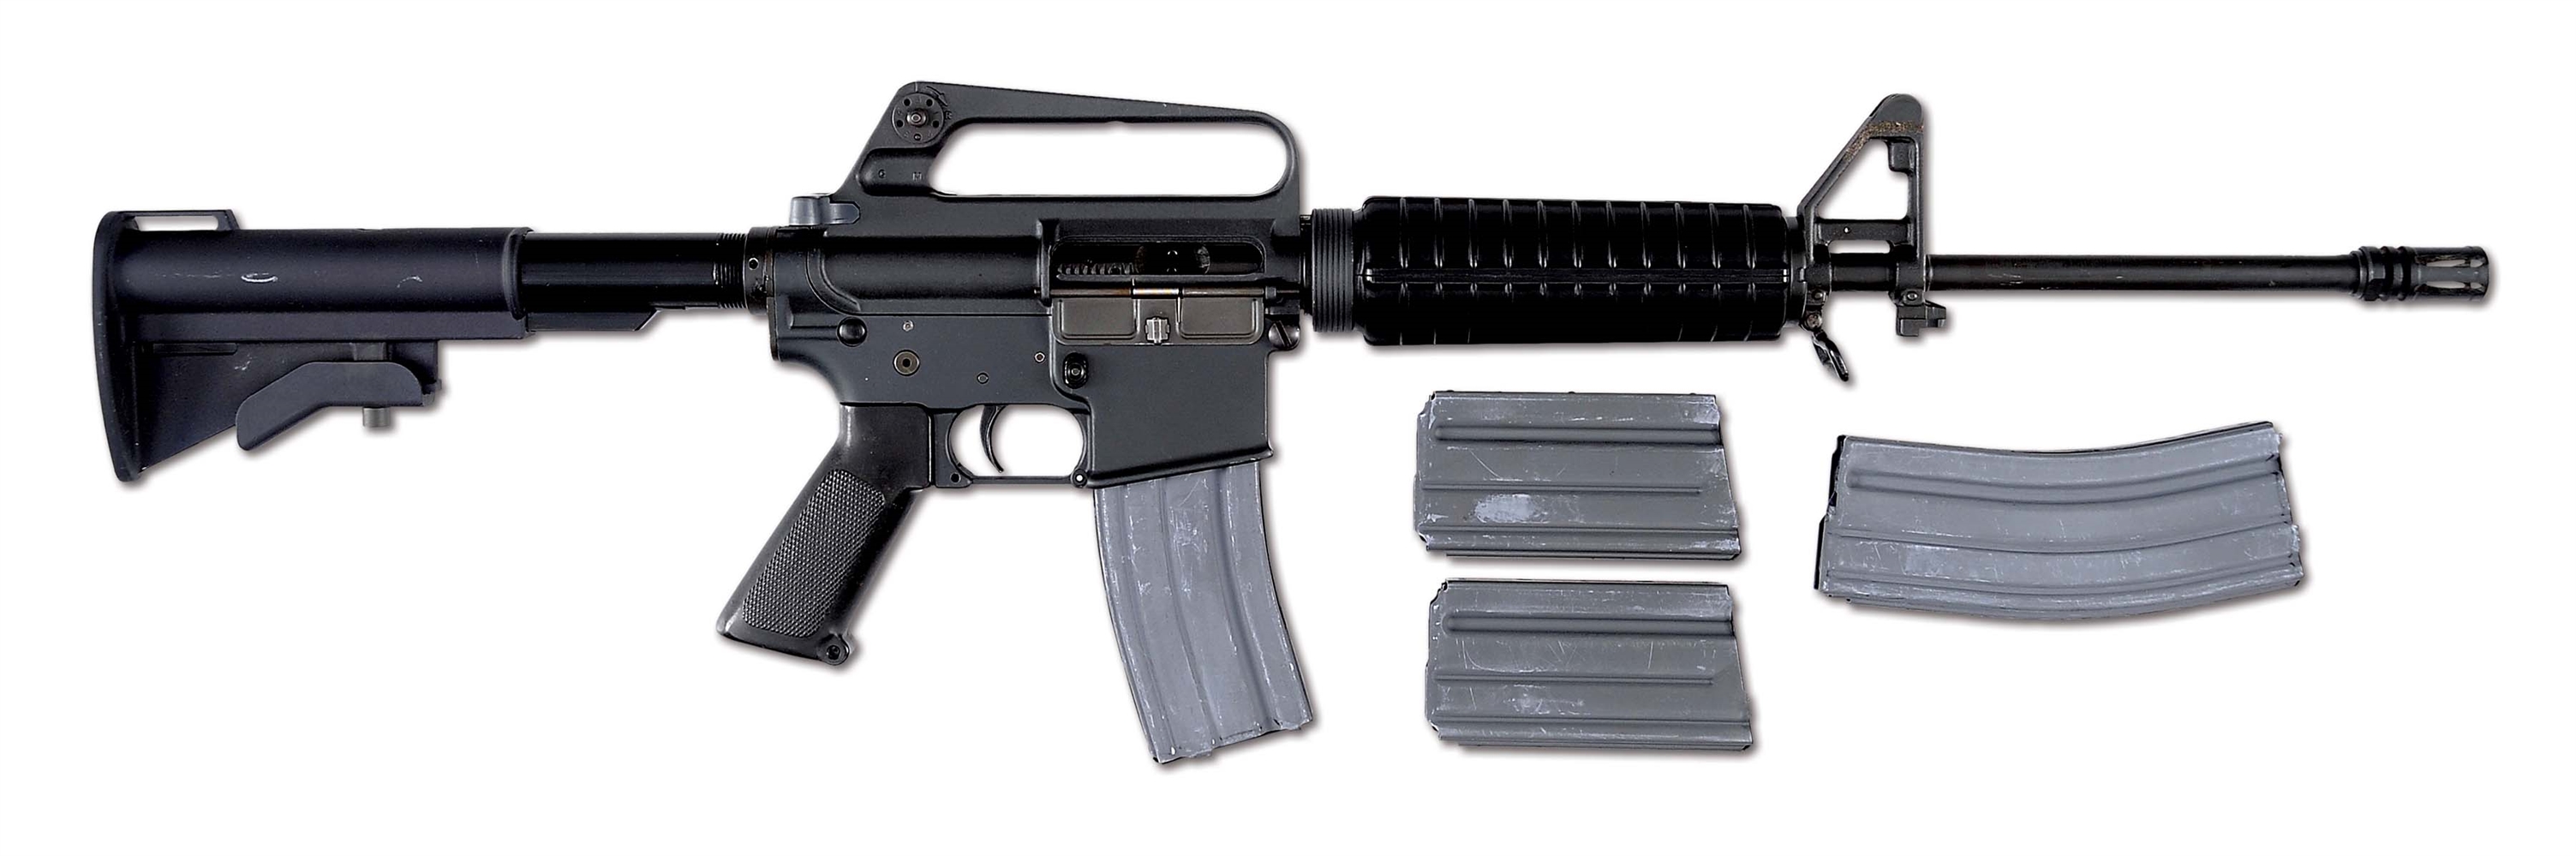 (N) TYROL REGISTERED COLT AR15 SP1 MACHINE GUN WITH TELESCOPING STOCK (FULLY TRANSFERABLE).